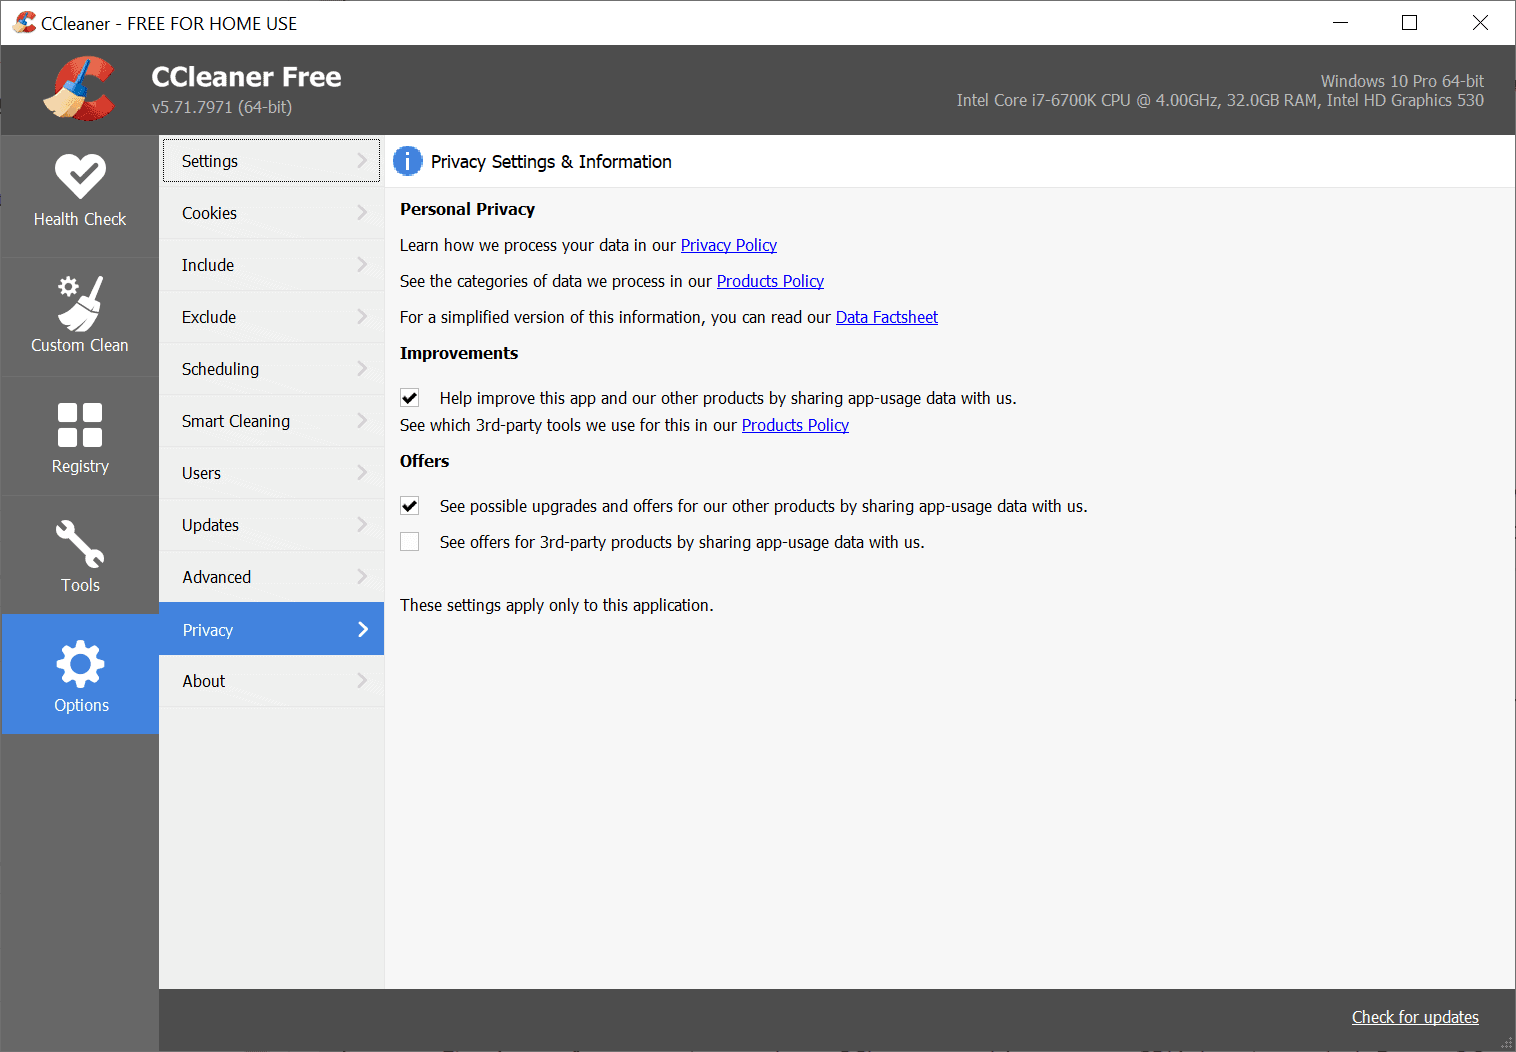 CCleaner 5.71 with new privacy opt-out for offers